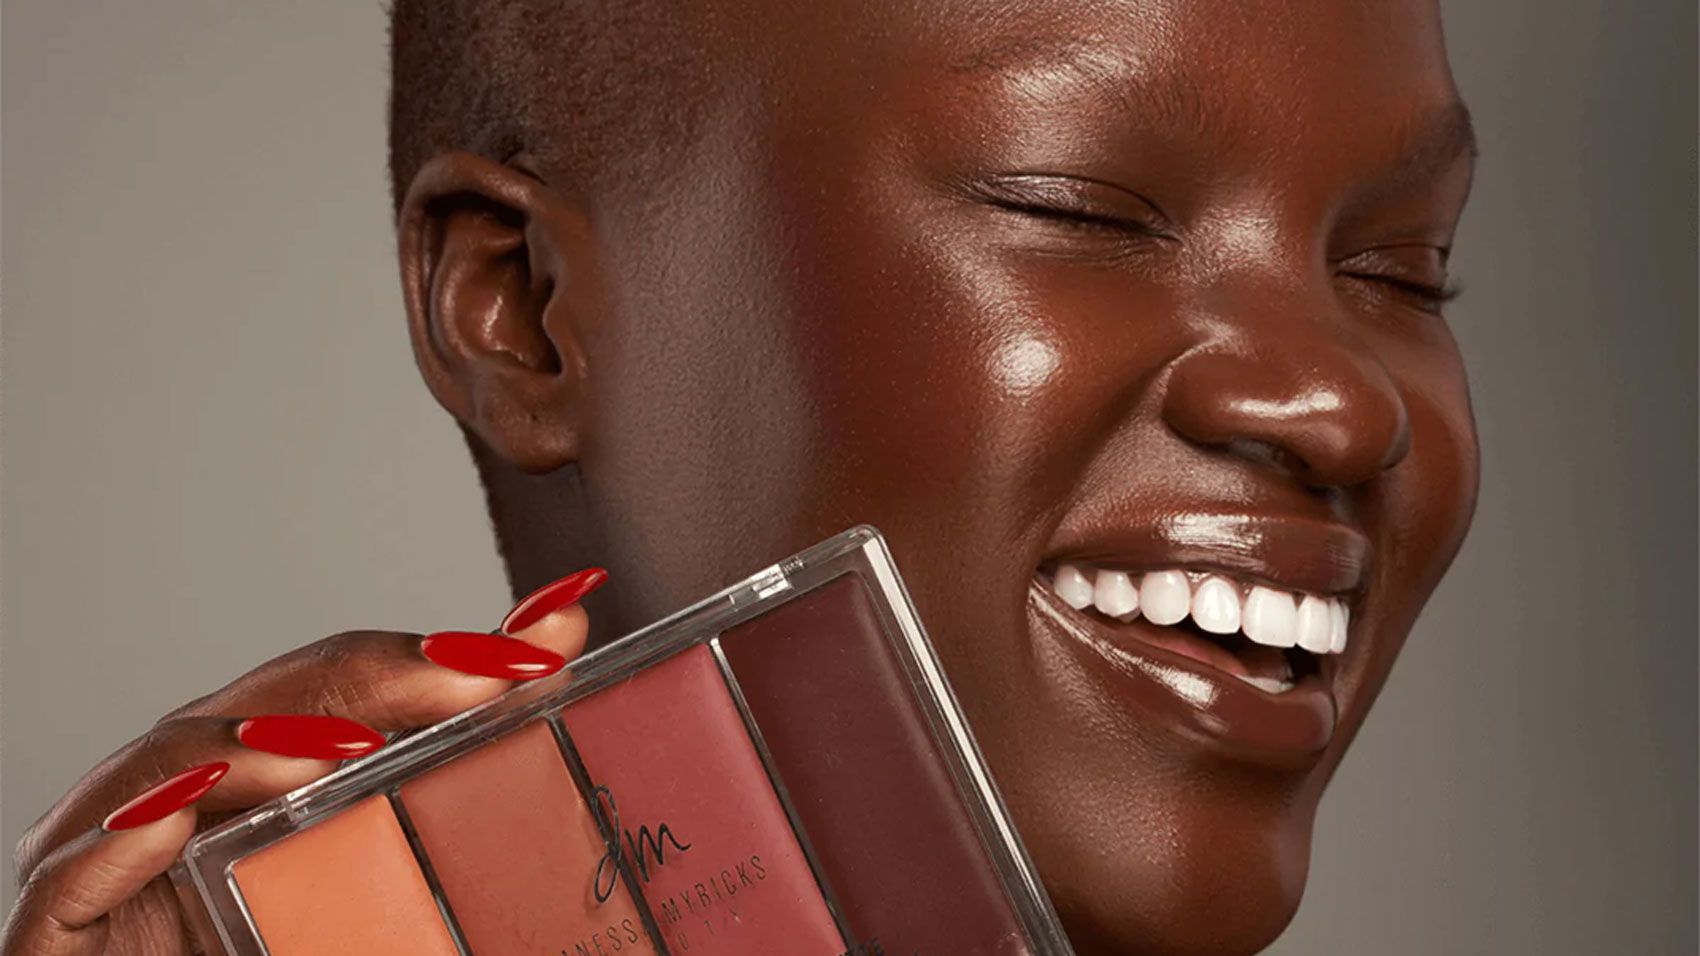 The Cult Makeup Brands You Need to Know About